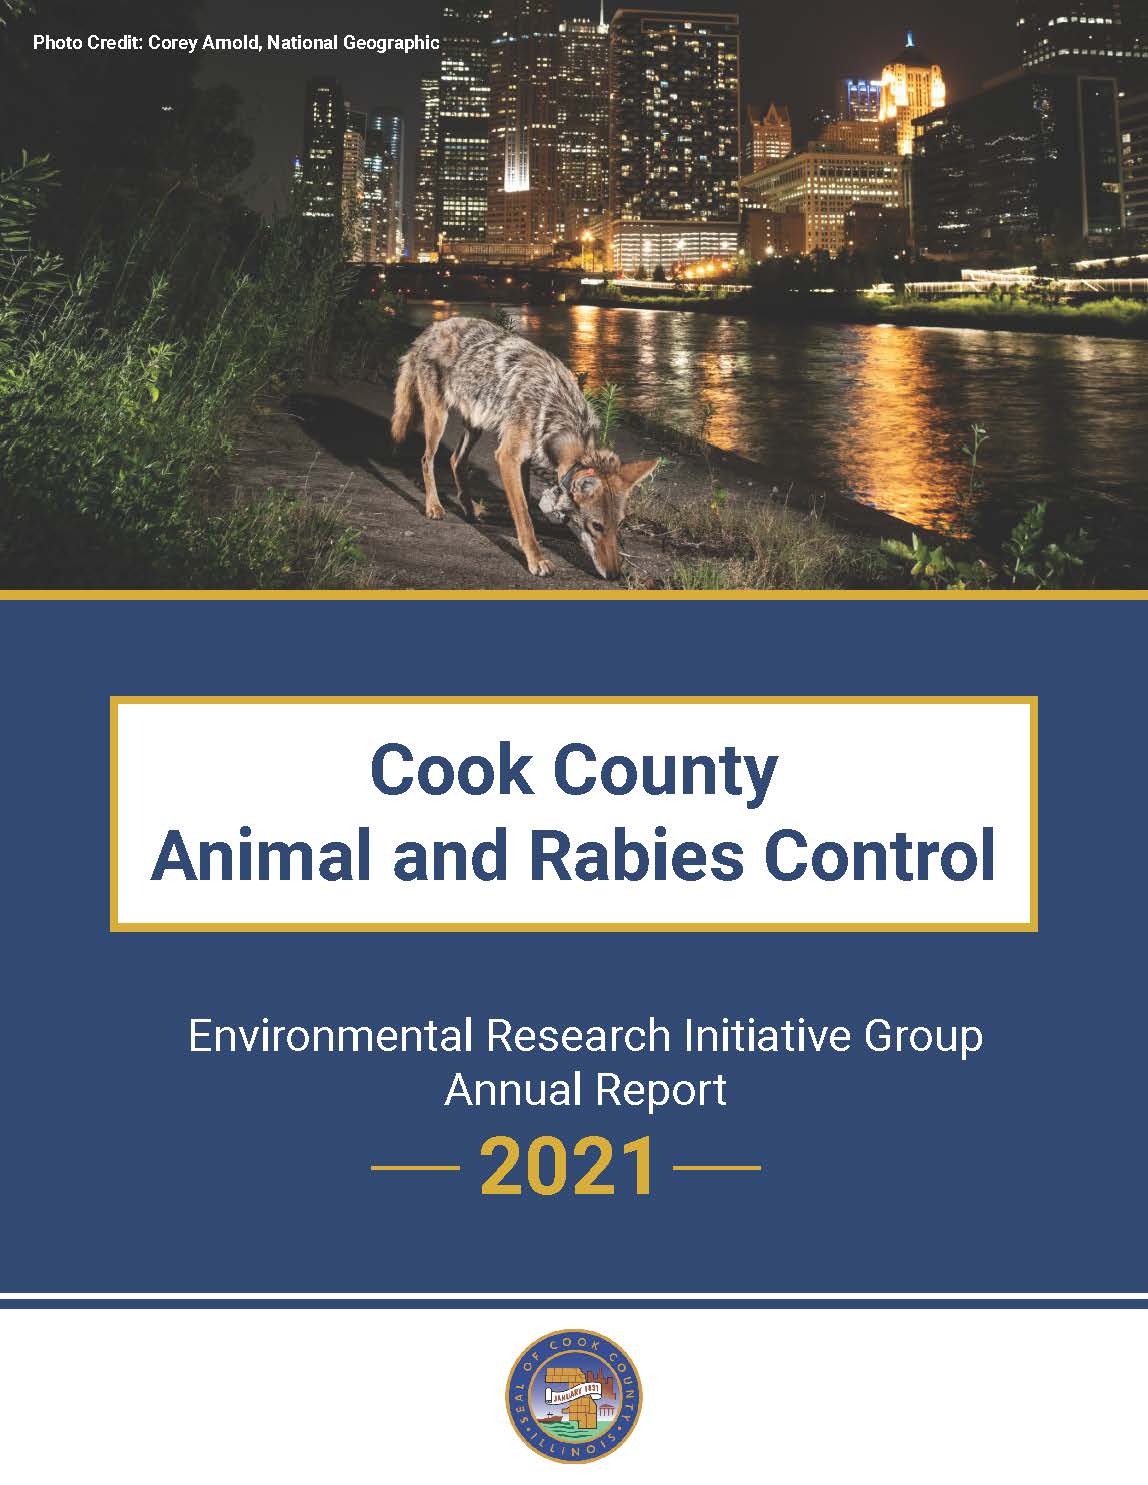 The cover of the 2021 Environmental Research Initiative Group Annual Report shows a coyote in an urban environment.